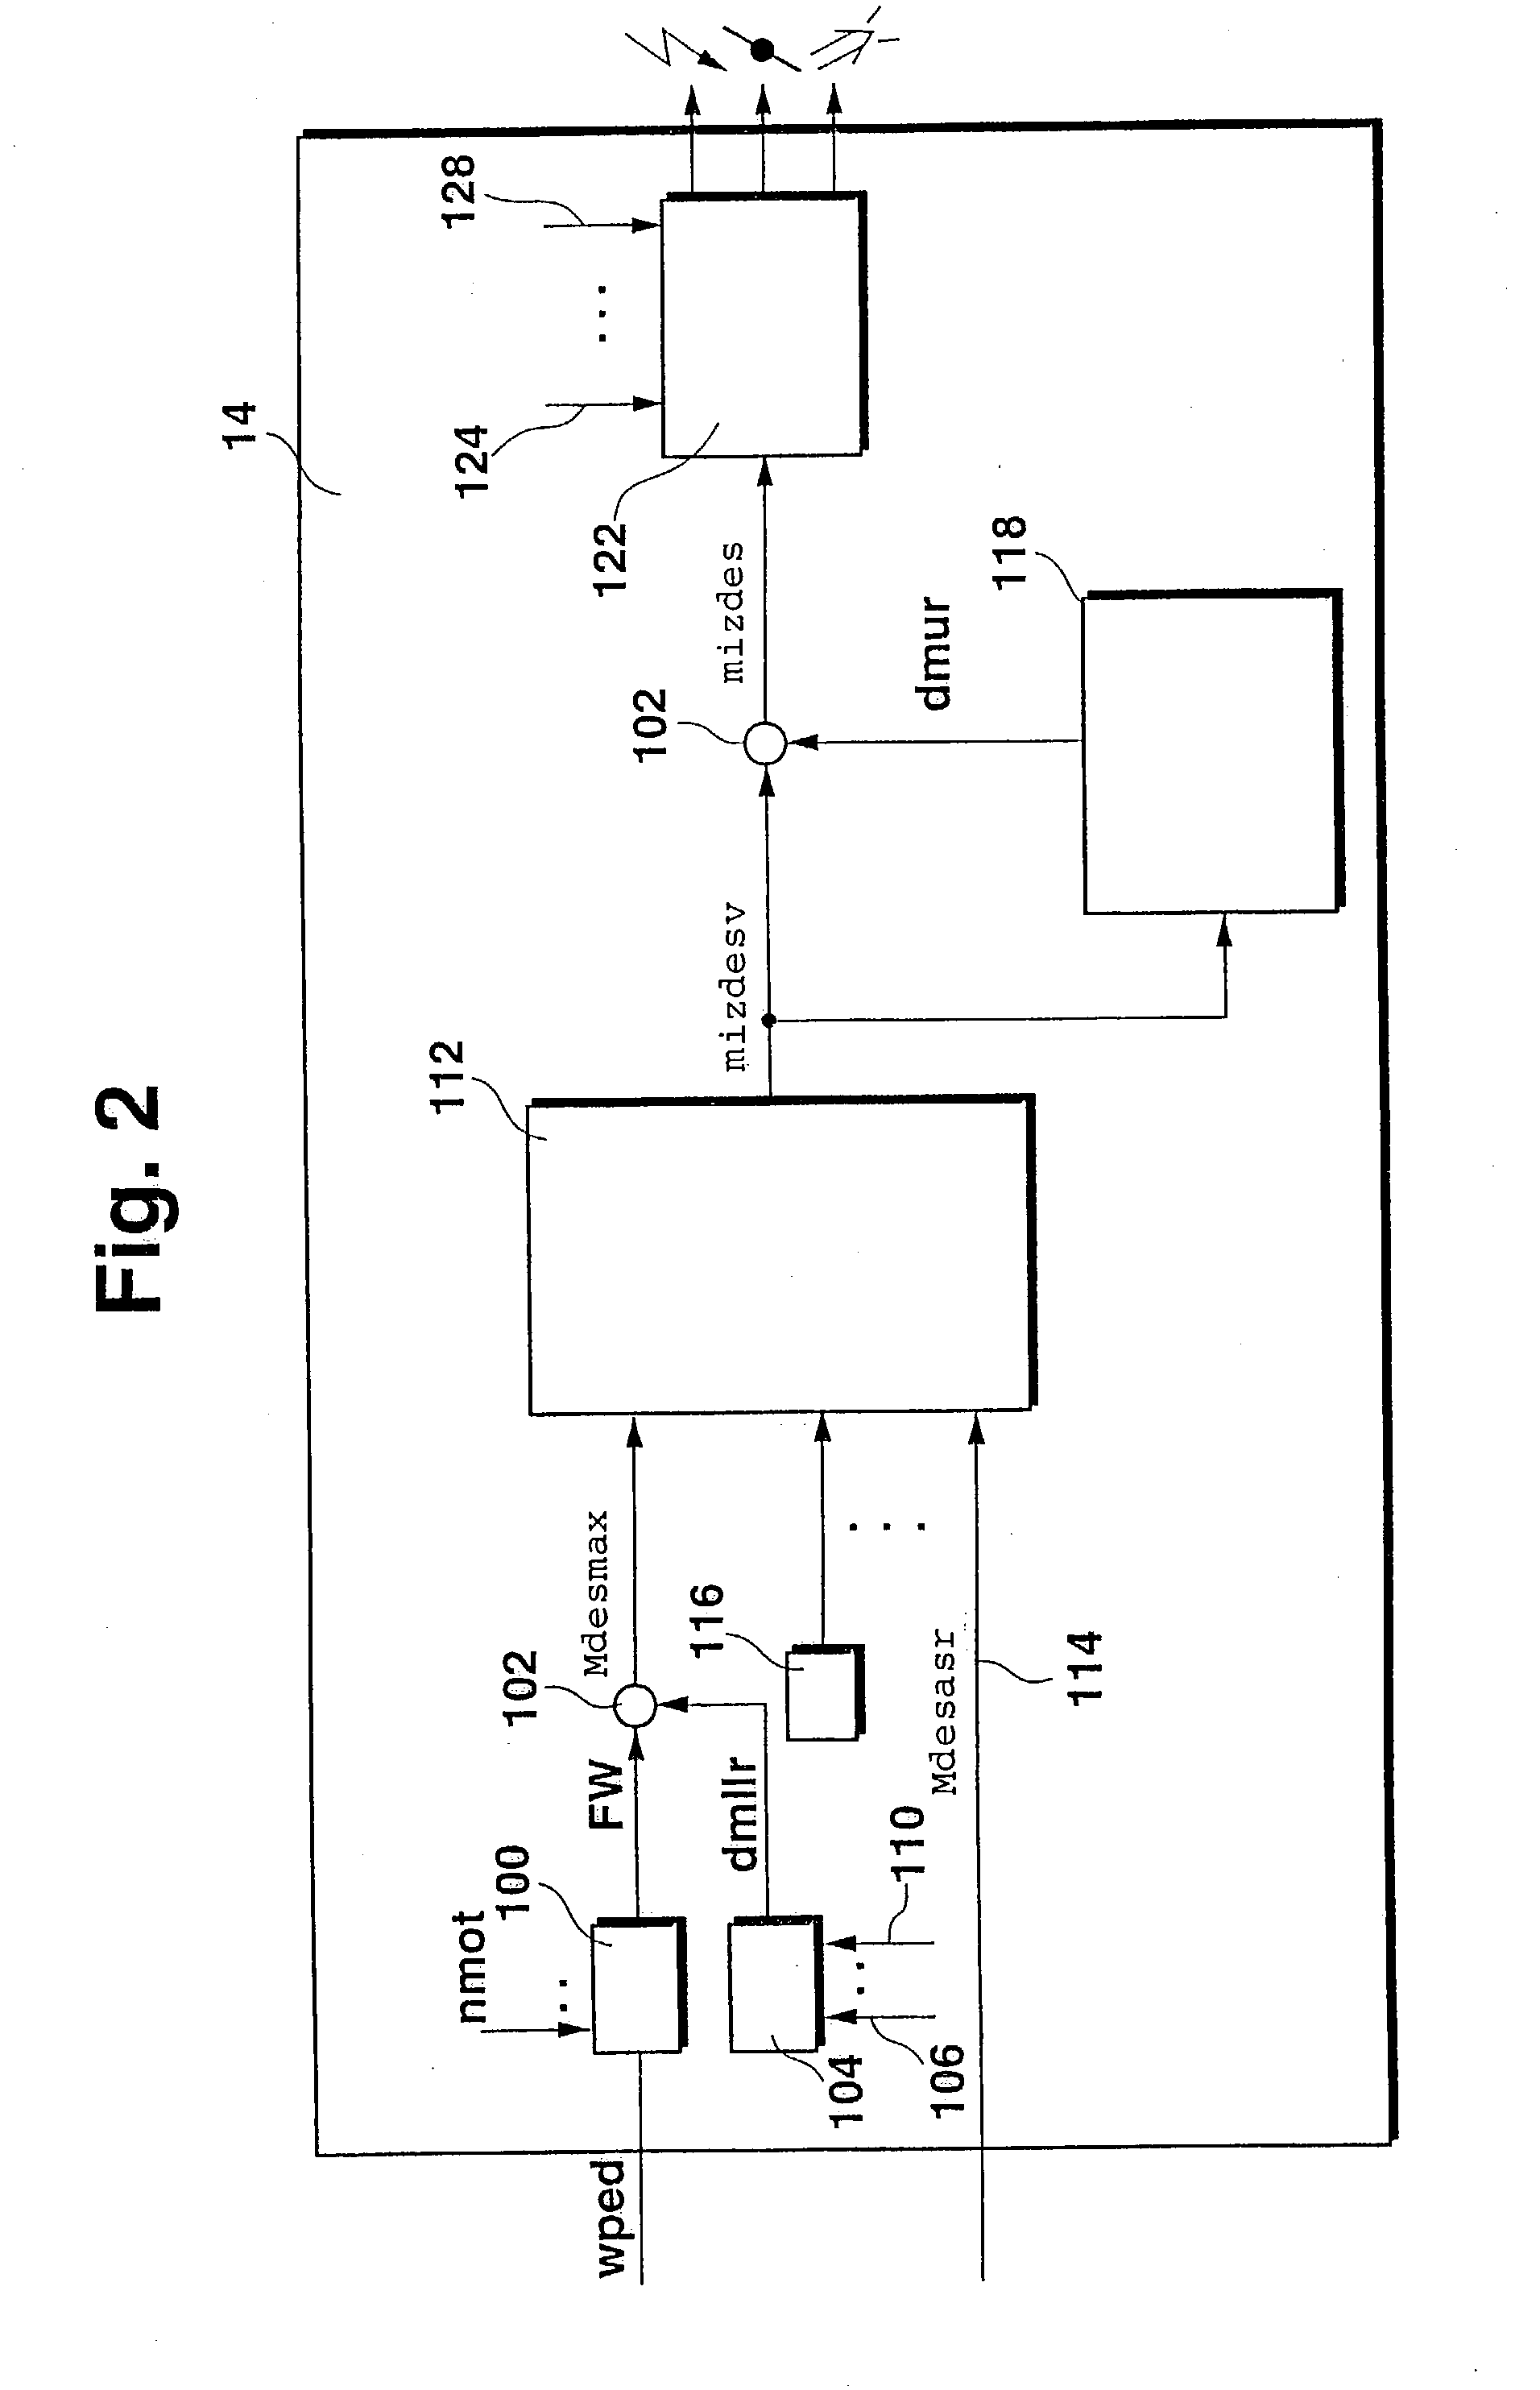 Method and device for controlling the drive unit of a motor vehicle